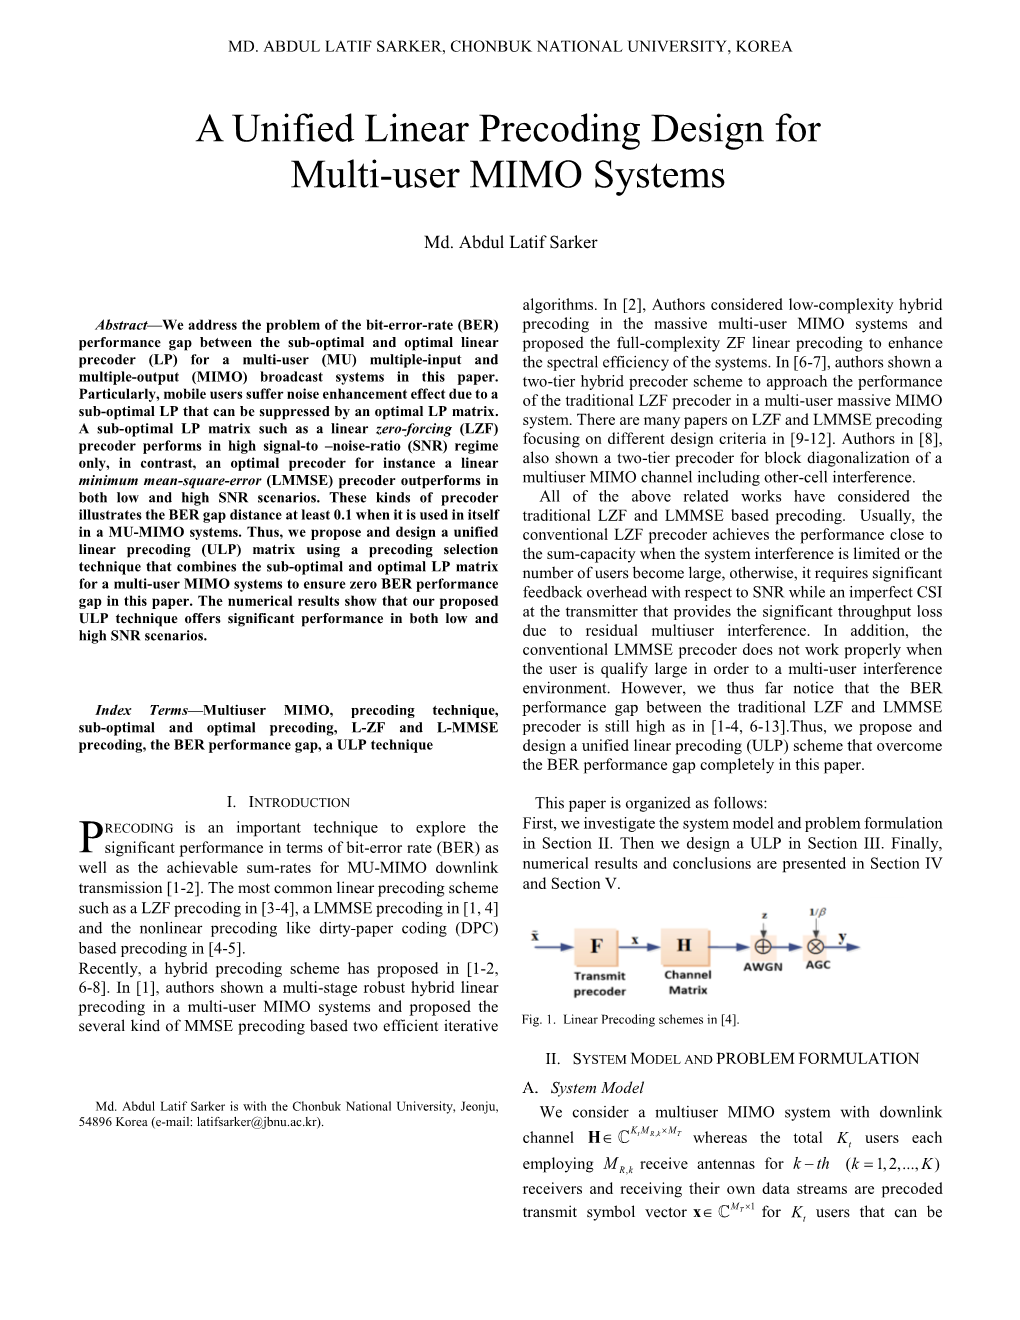 A Unified Linear Precoding Design for Multi-User MIMO Systems